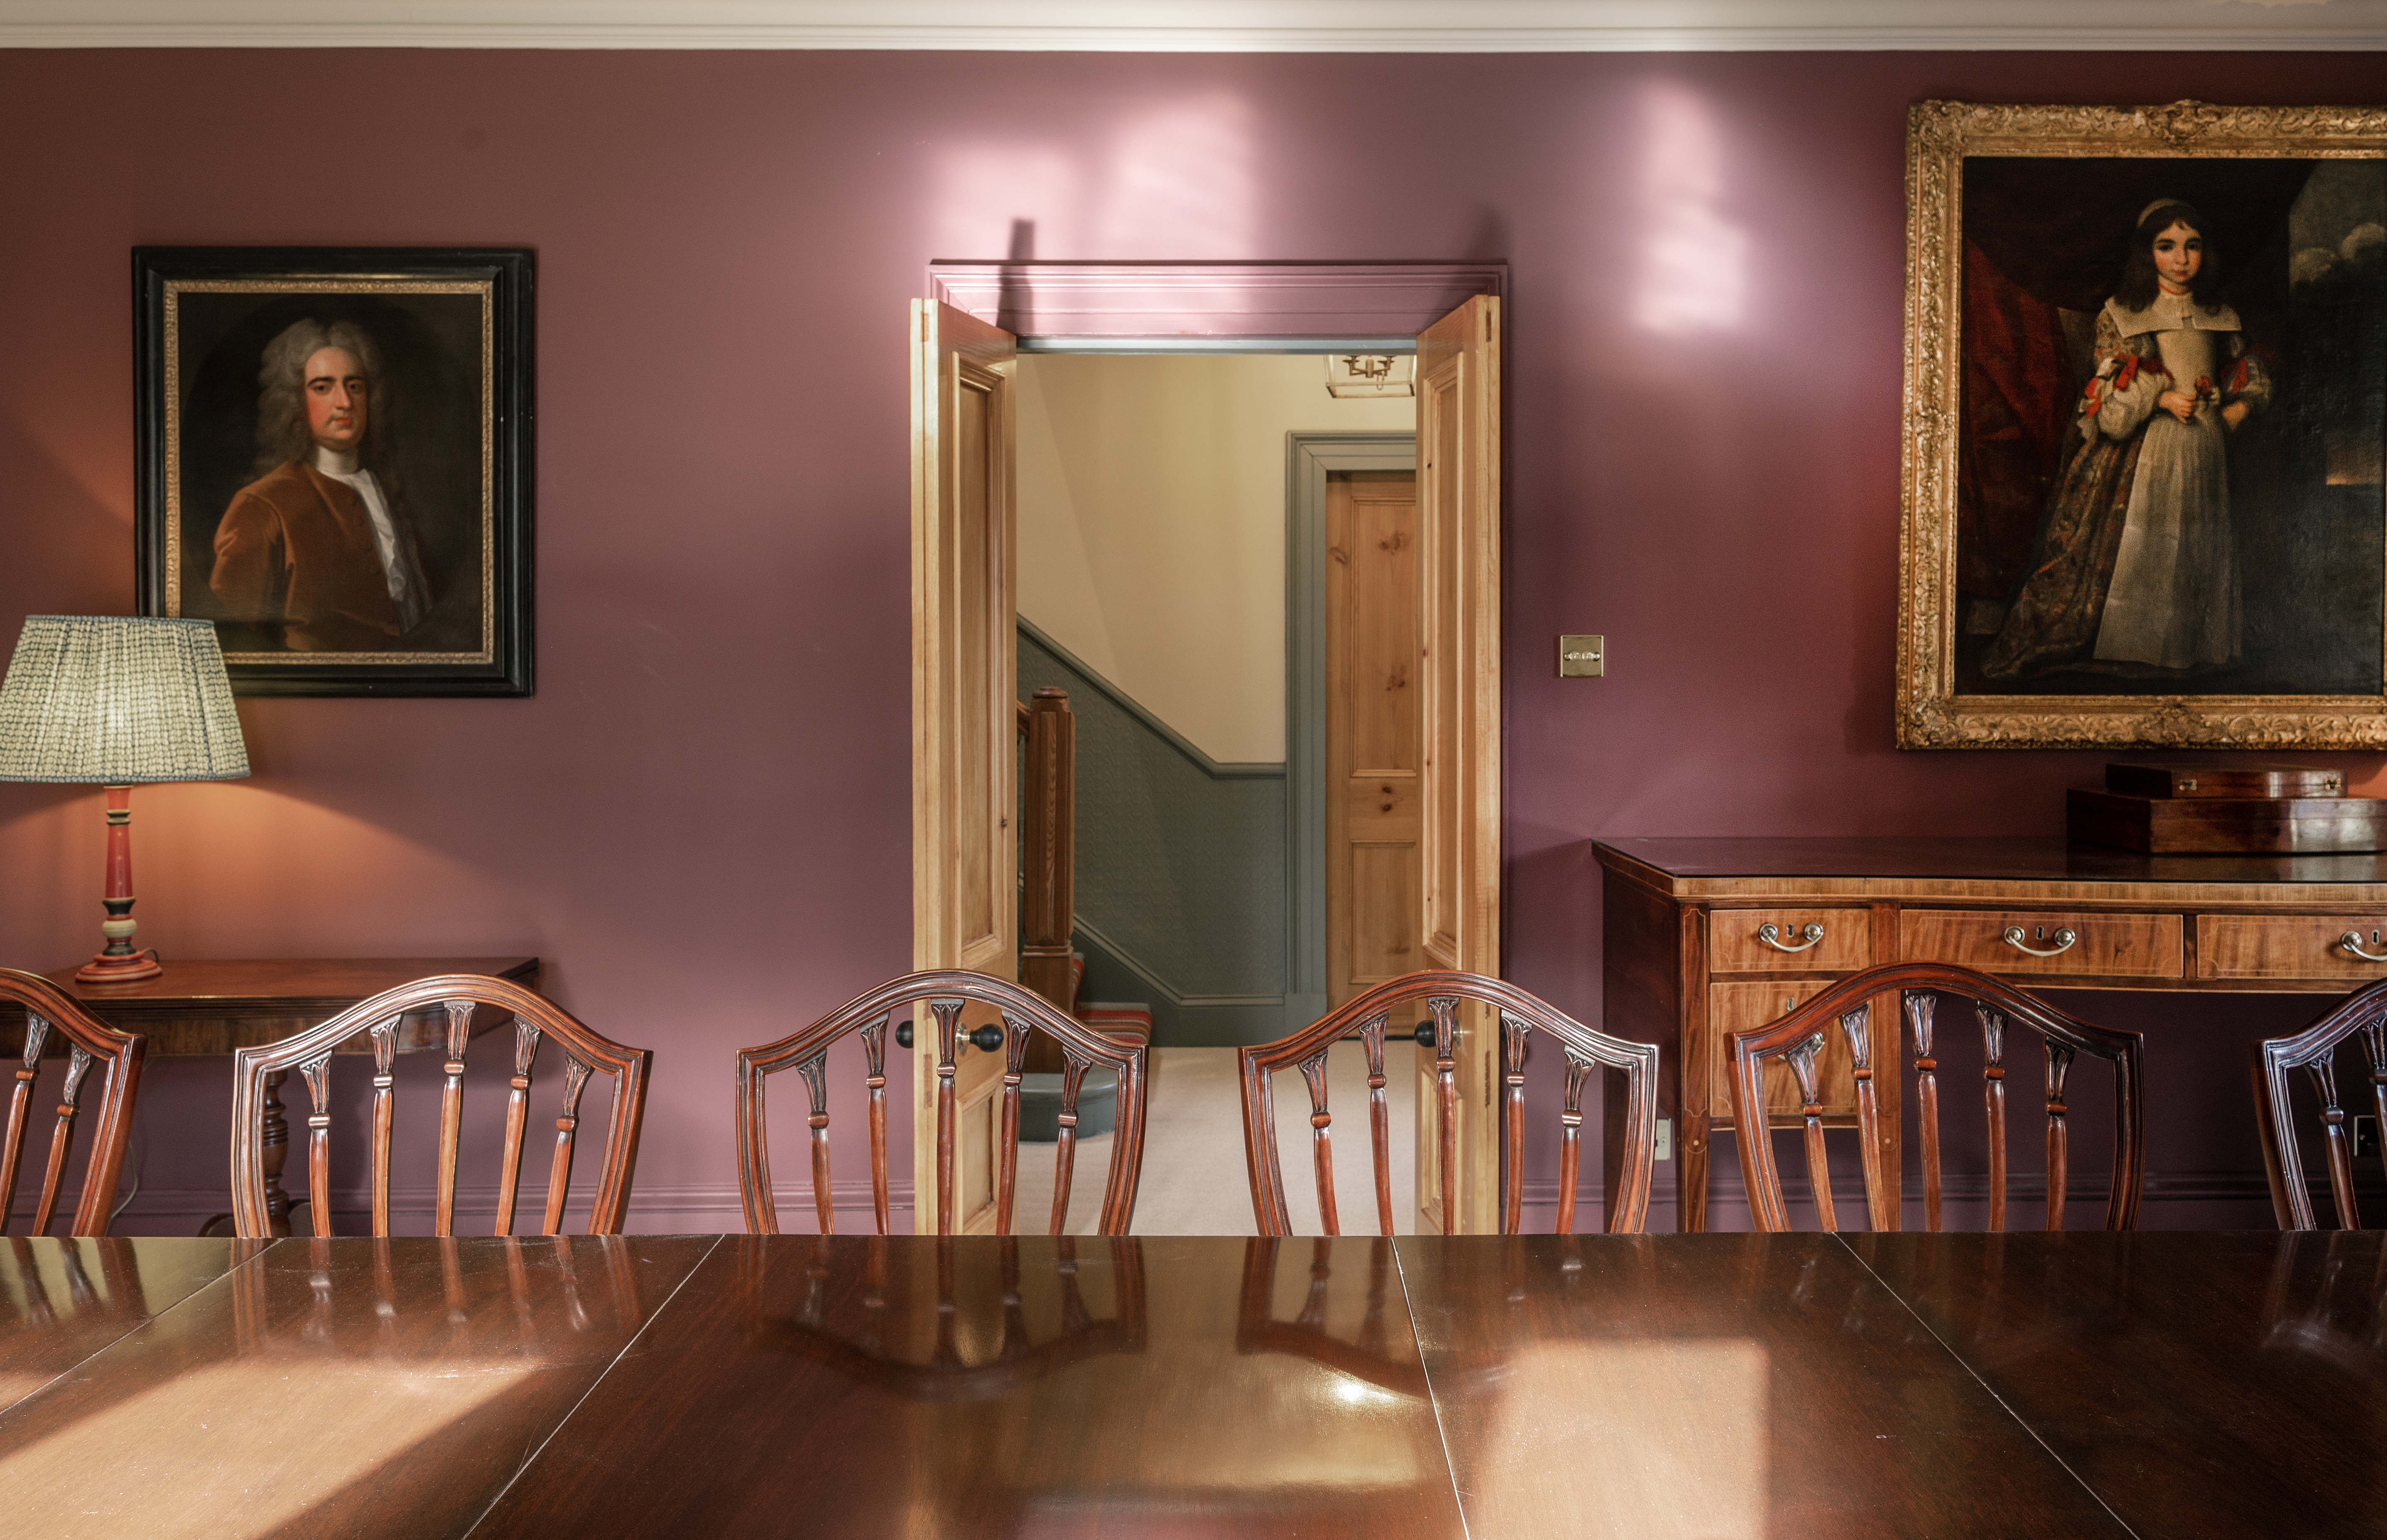 Delnabo - formal dining room with ancestral portraits looking on